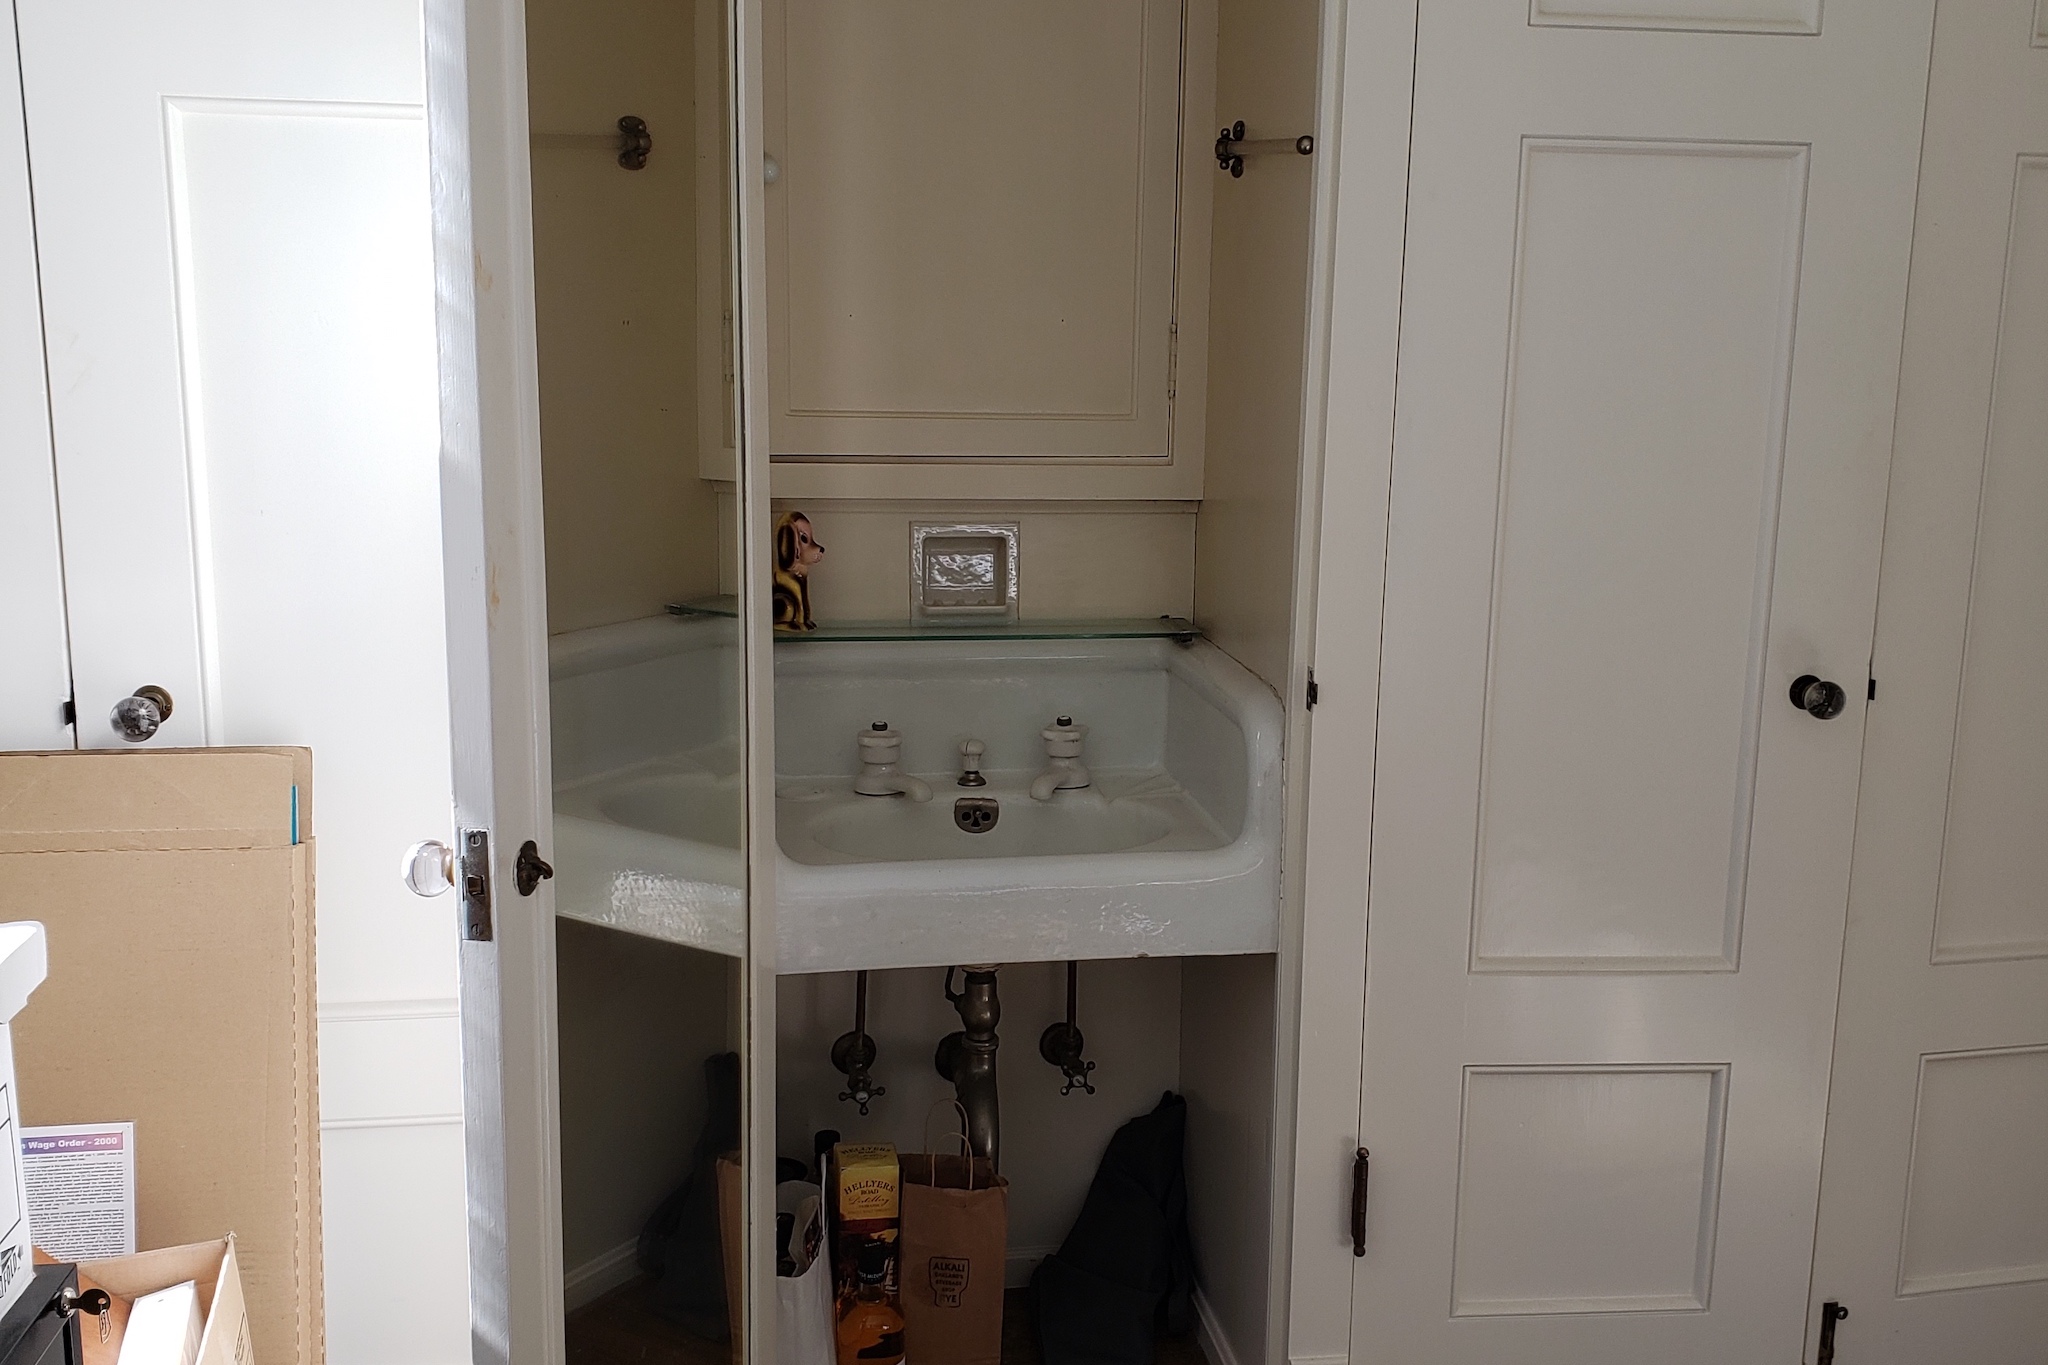 The story behind the sink in the bedroom of your apartment and why so many SF homes have them